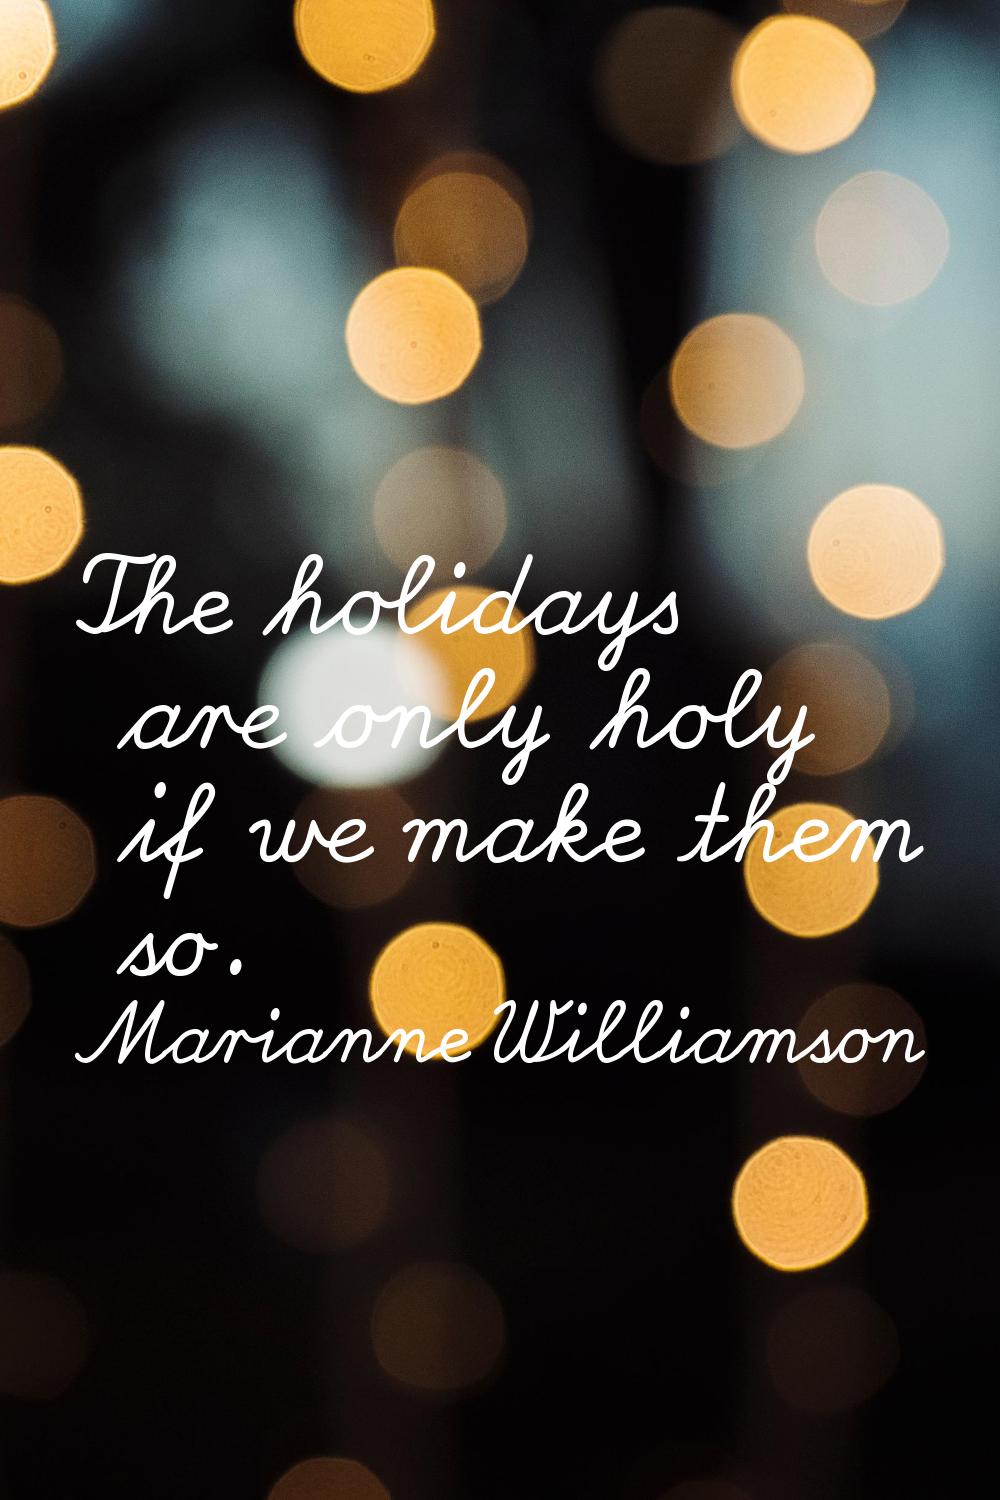 The holidays are only holy if we make them so.